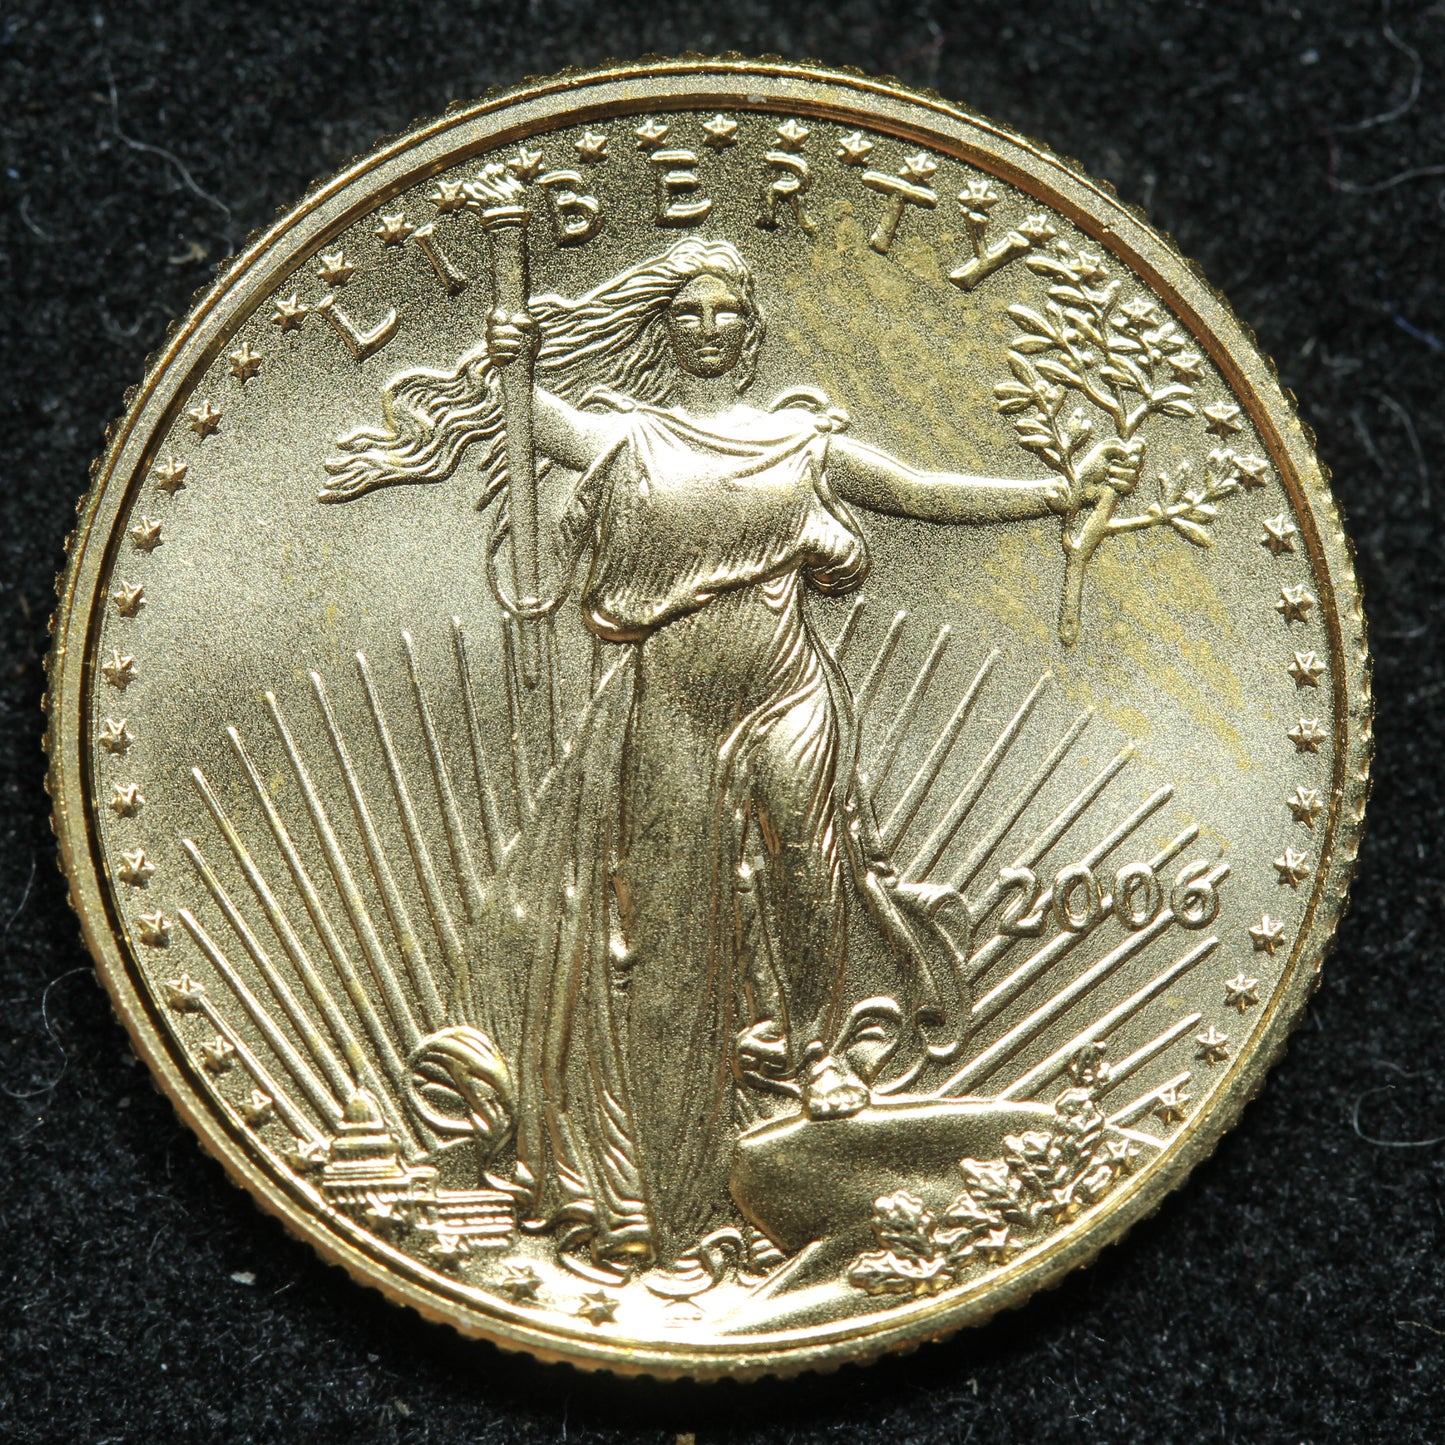 2006 1/10 Oz 5$ Gold American Eagle - Exact Coin Pictured (#3)